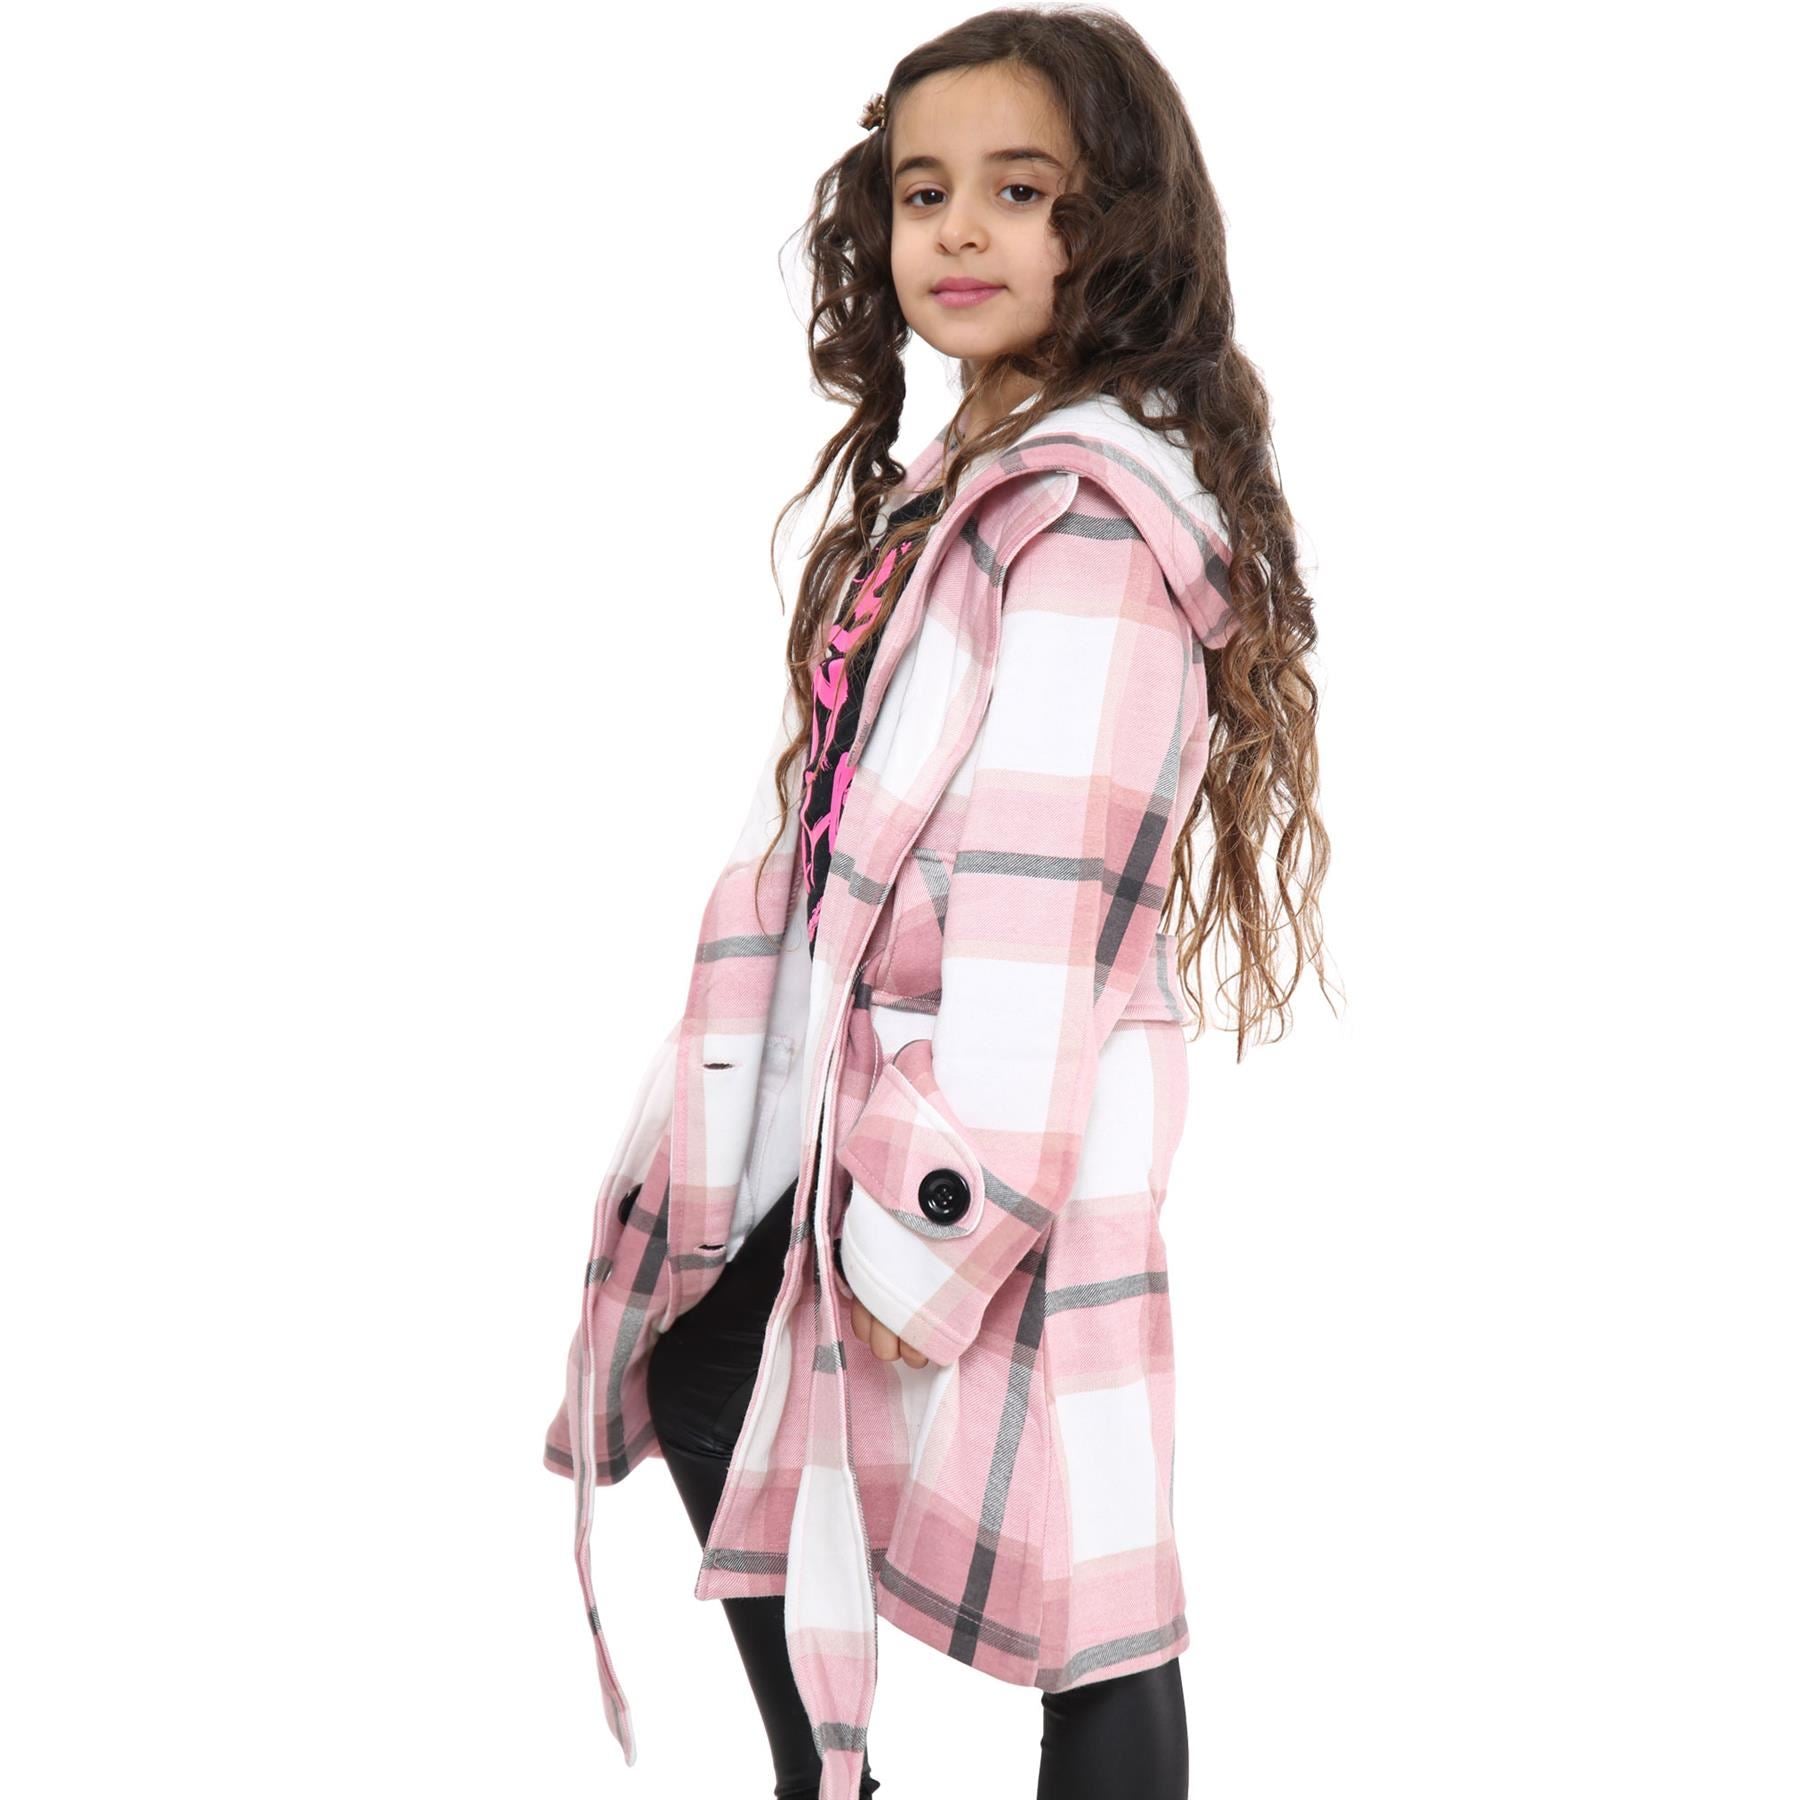 Kids Girls Overcoats Hooded Trench Coats Lapels Pink Check Padded Parka Jackets